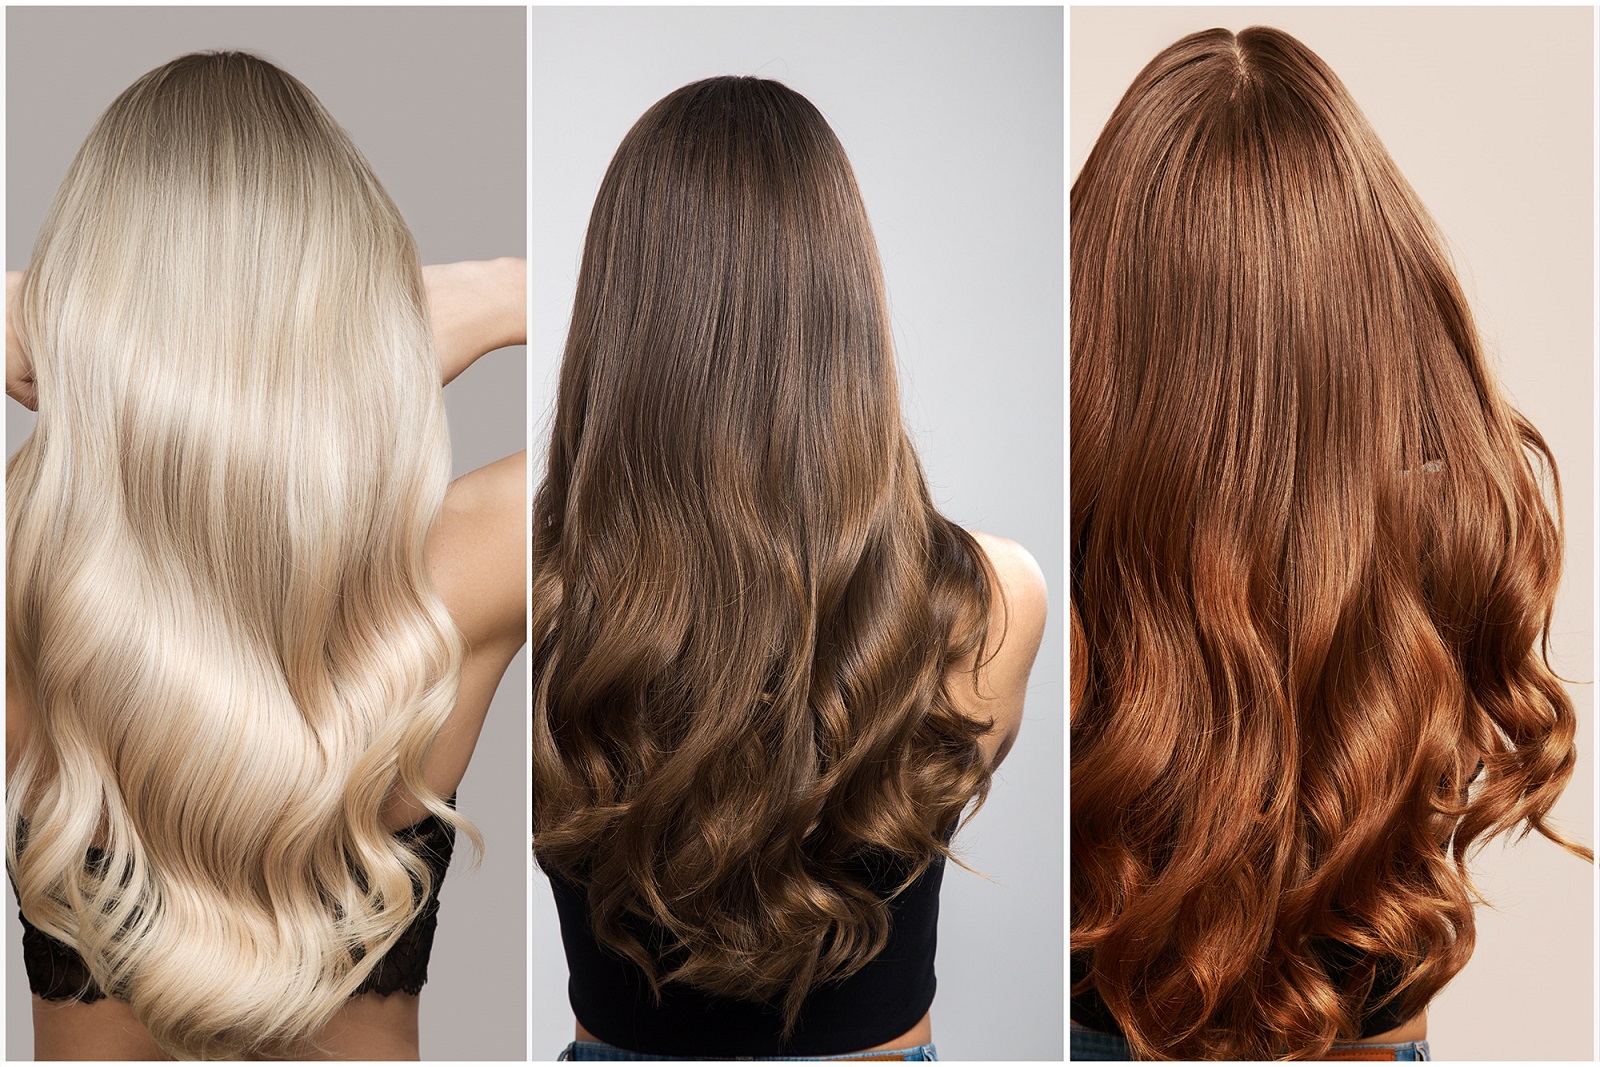 Hair of different shades of brunette, blonde and red. Woman coll